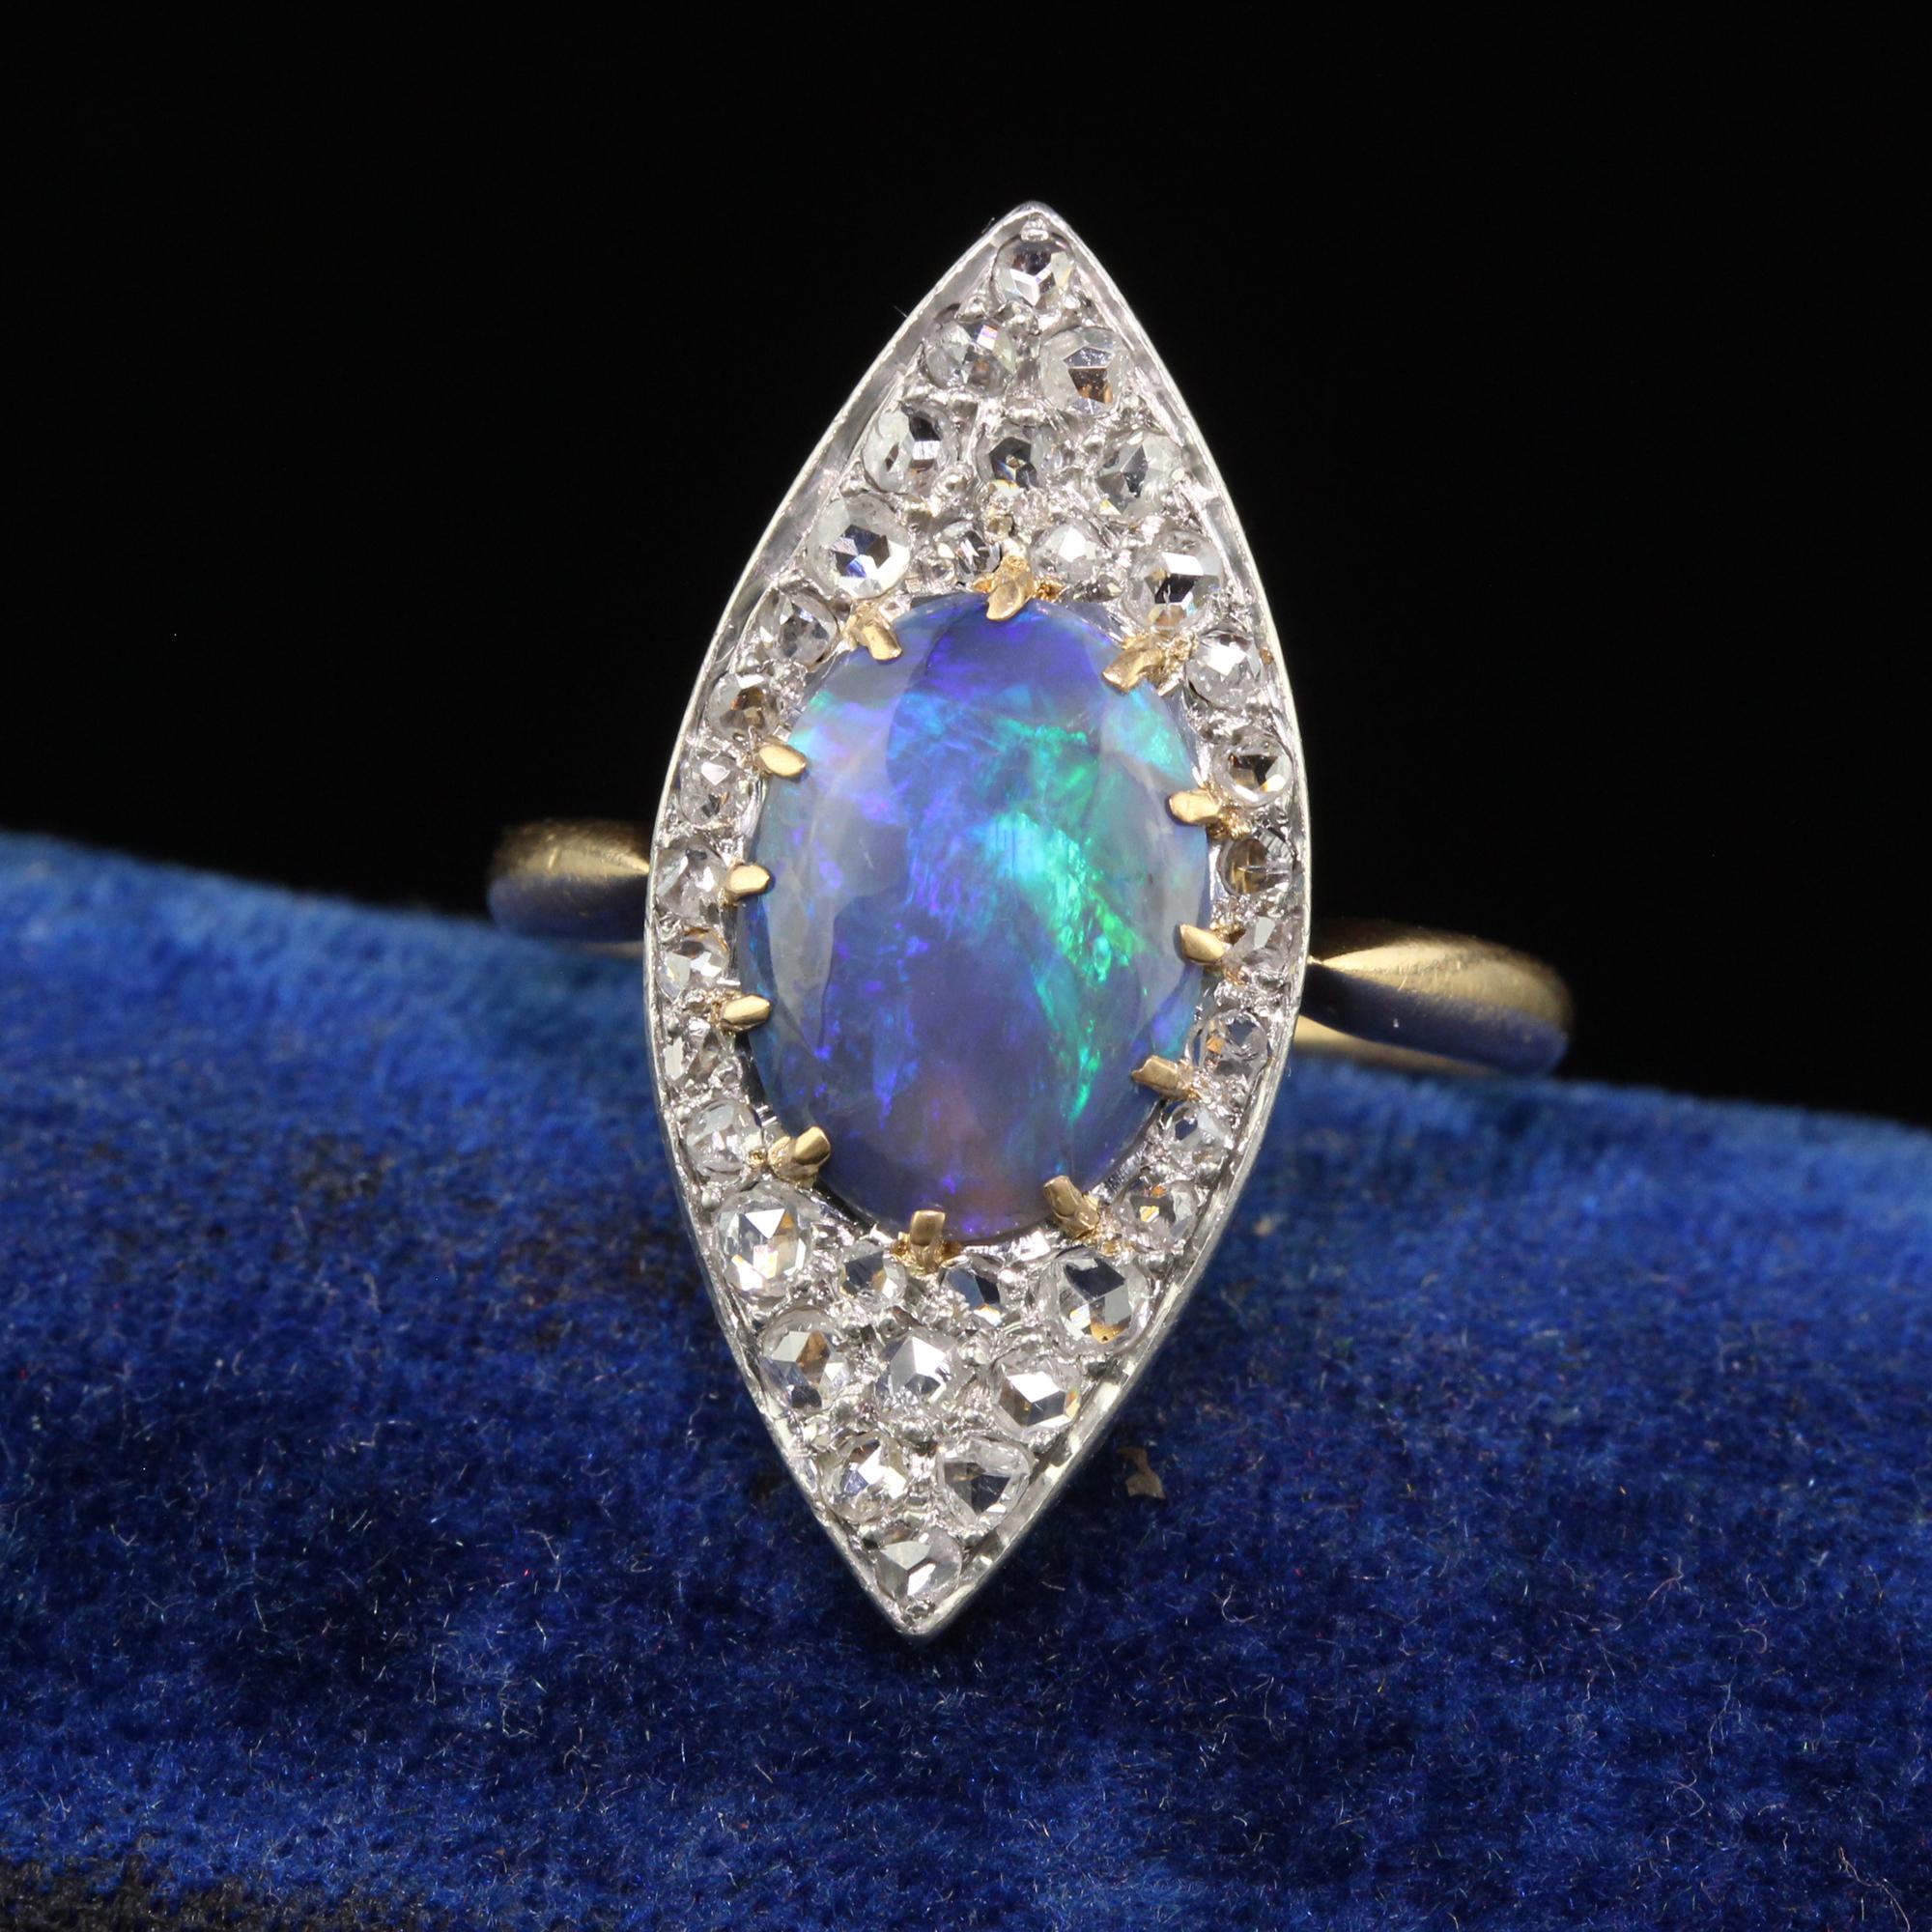 Beautiful Antique Edwardian 18K Yellow Gold Rose Cut Diamond and Black Opal Navette Ring. This gorgeous ring is crafted in 18k yellow gold and platinum top. The center of the ring holds a gorgeous cabochon black opal that has beautiful flashes of